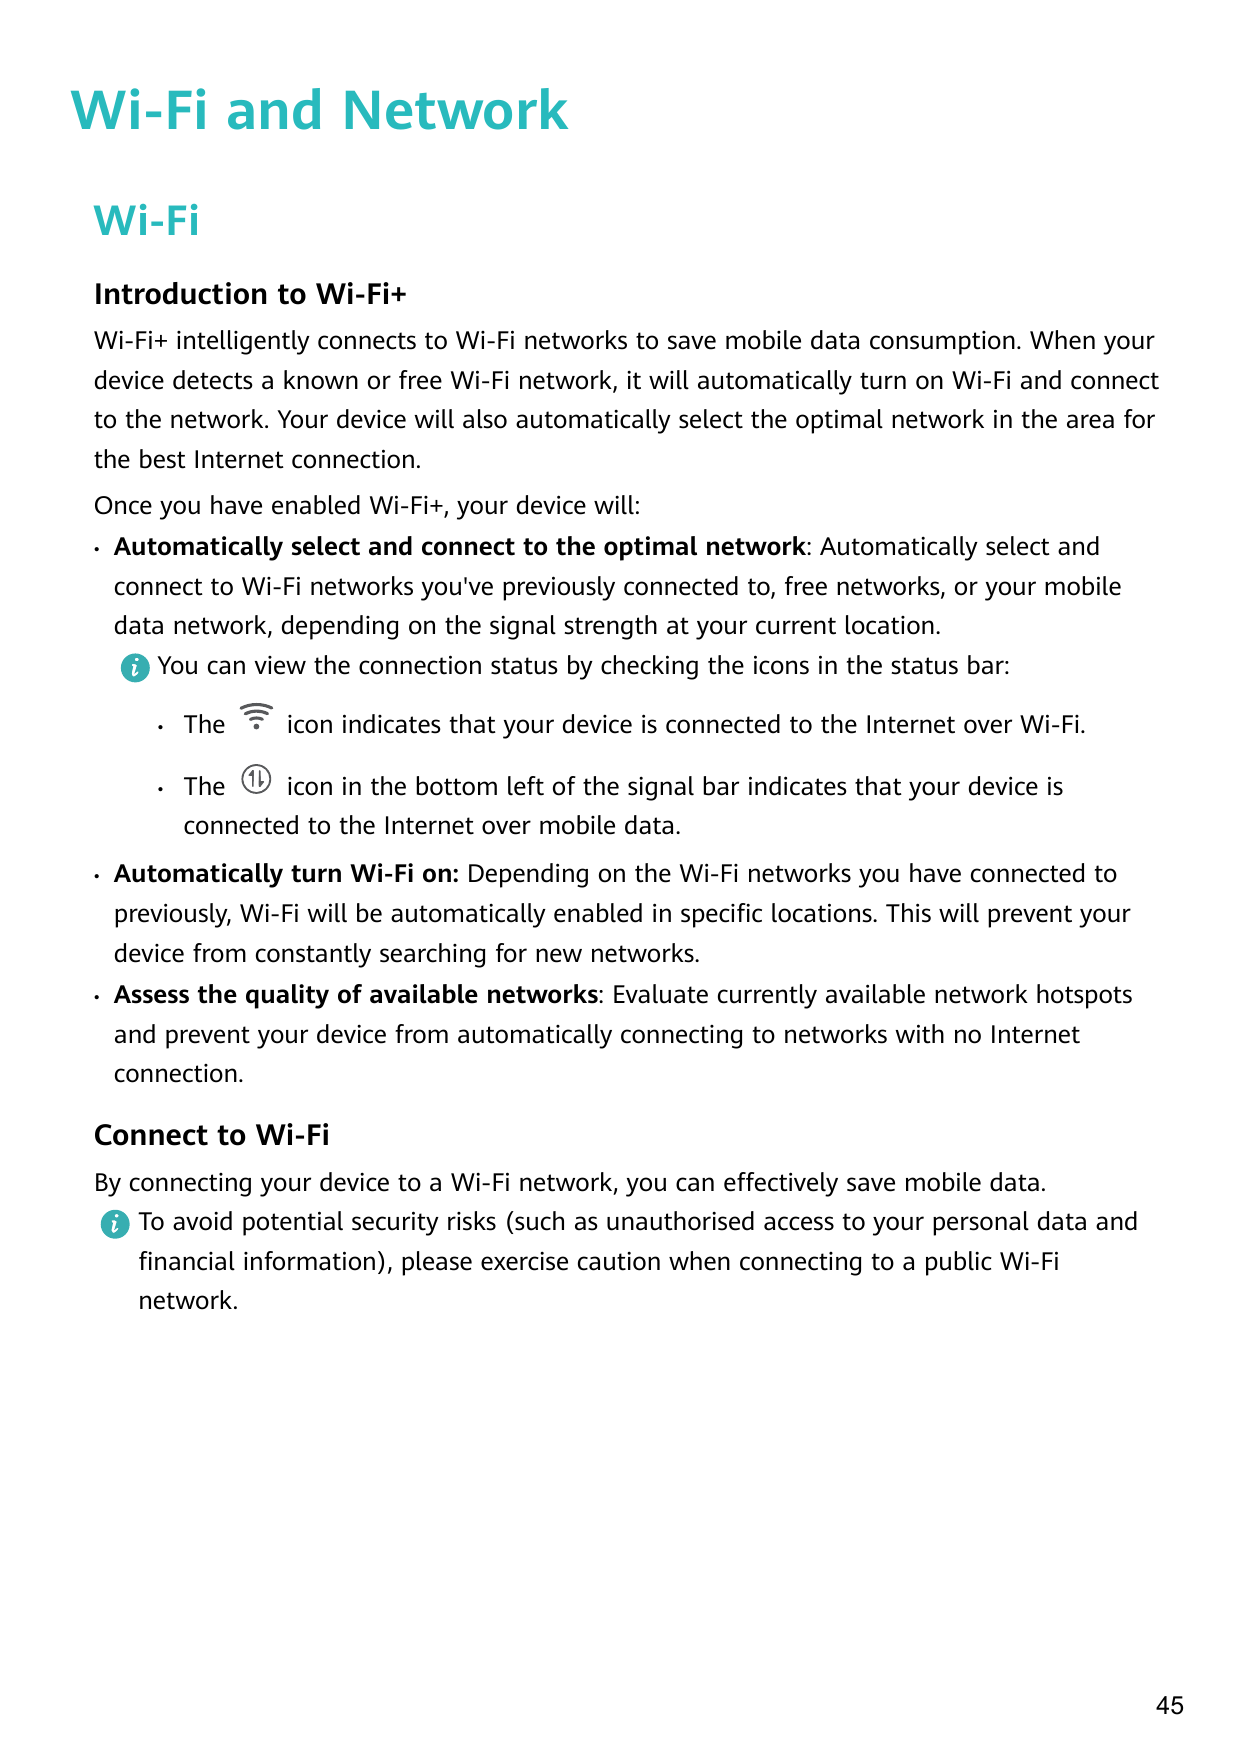 Wi-Fi and NetworkWi-FiIntroduction to Wi-Fi+Wi-Fi+ intelligently connects to Wi-Fi networks to save mobile data consumption. Whe